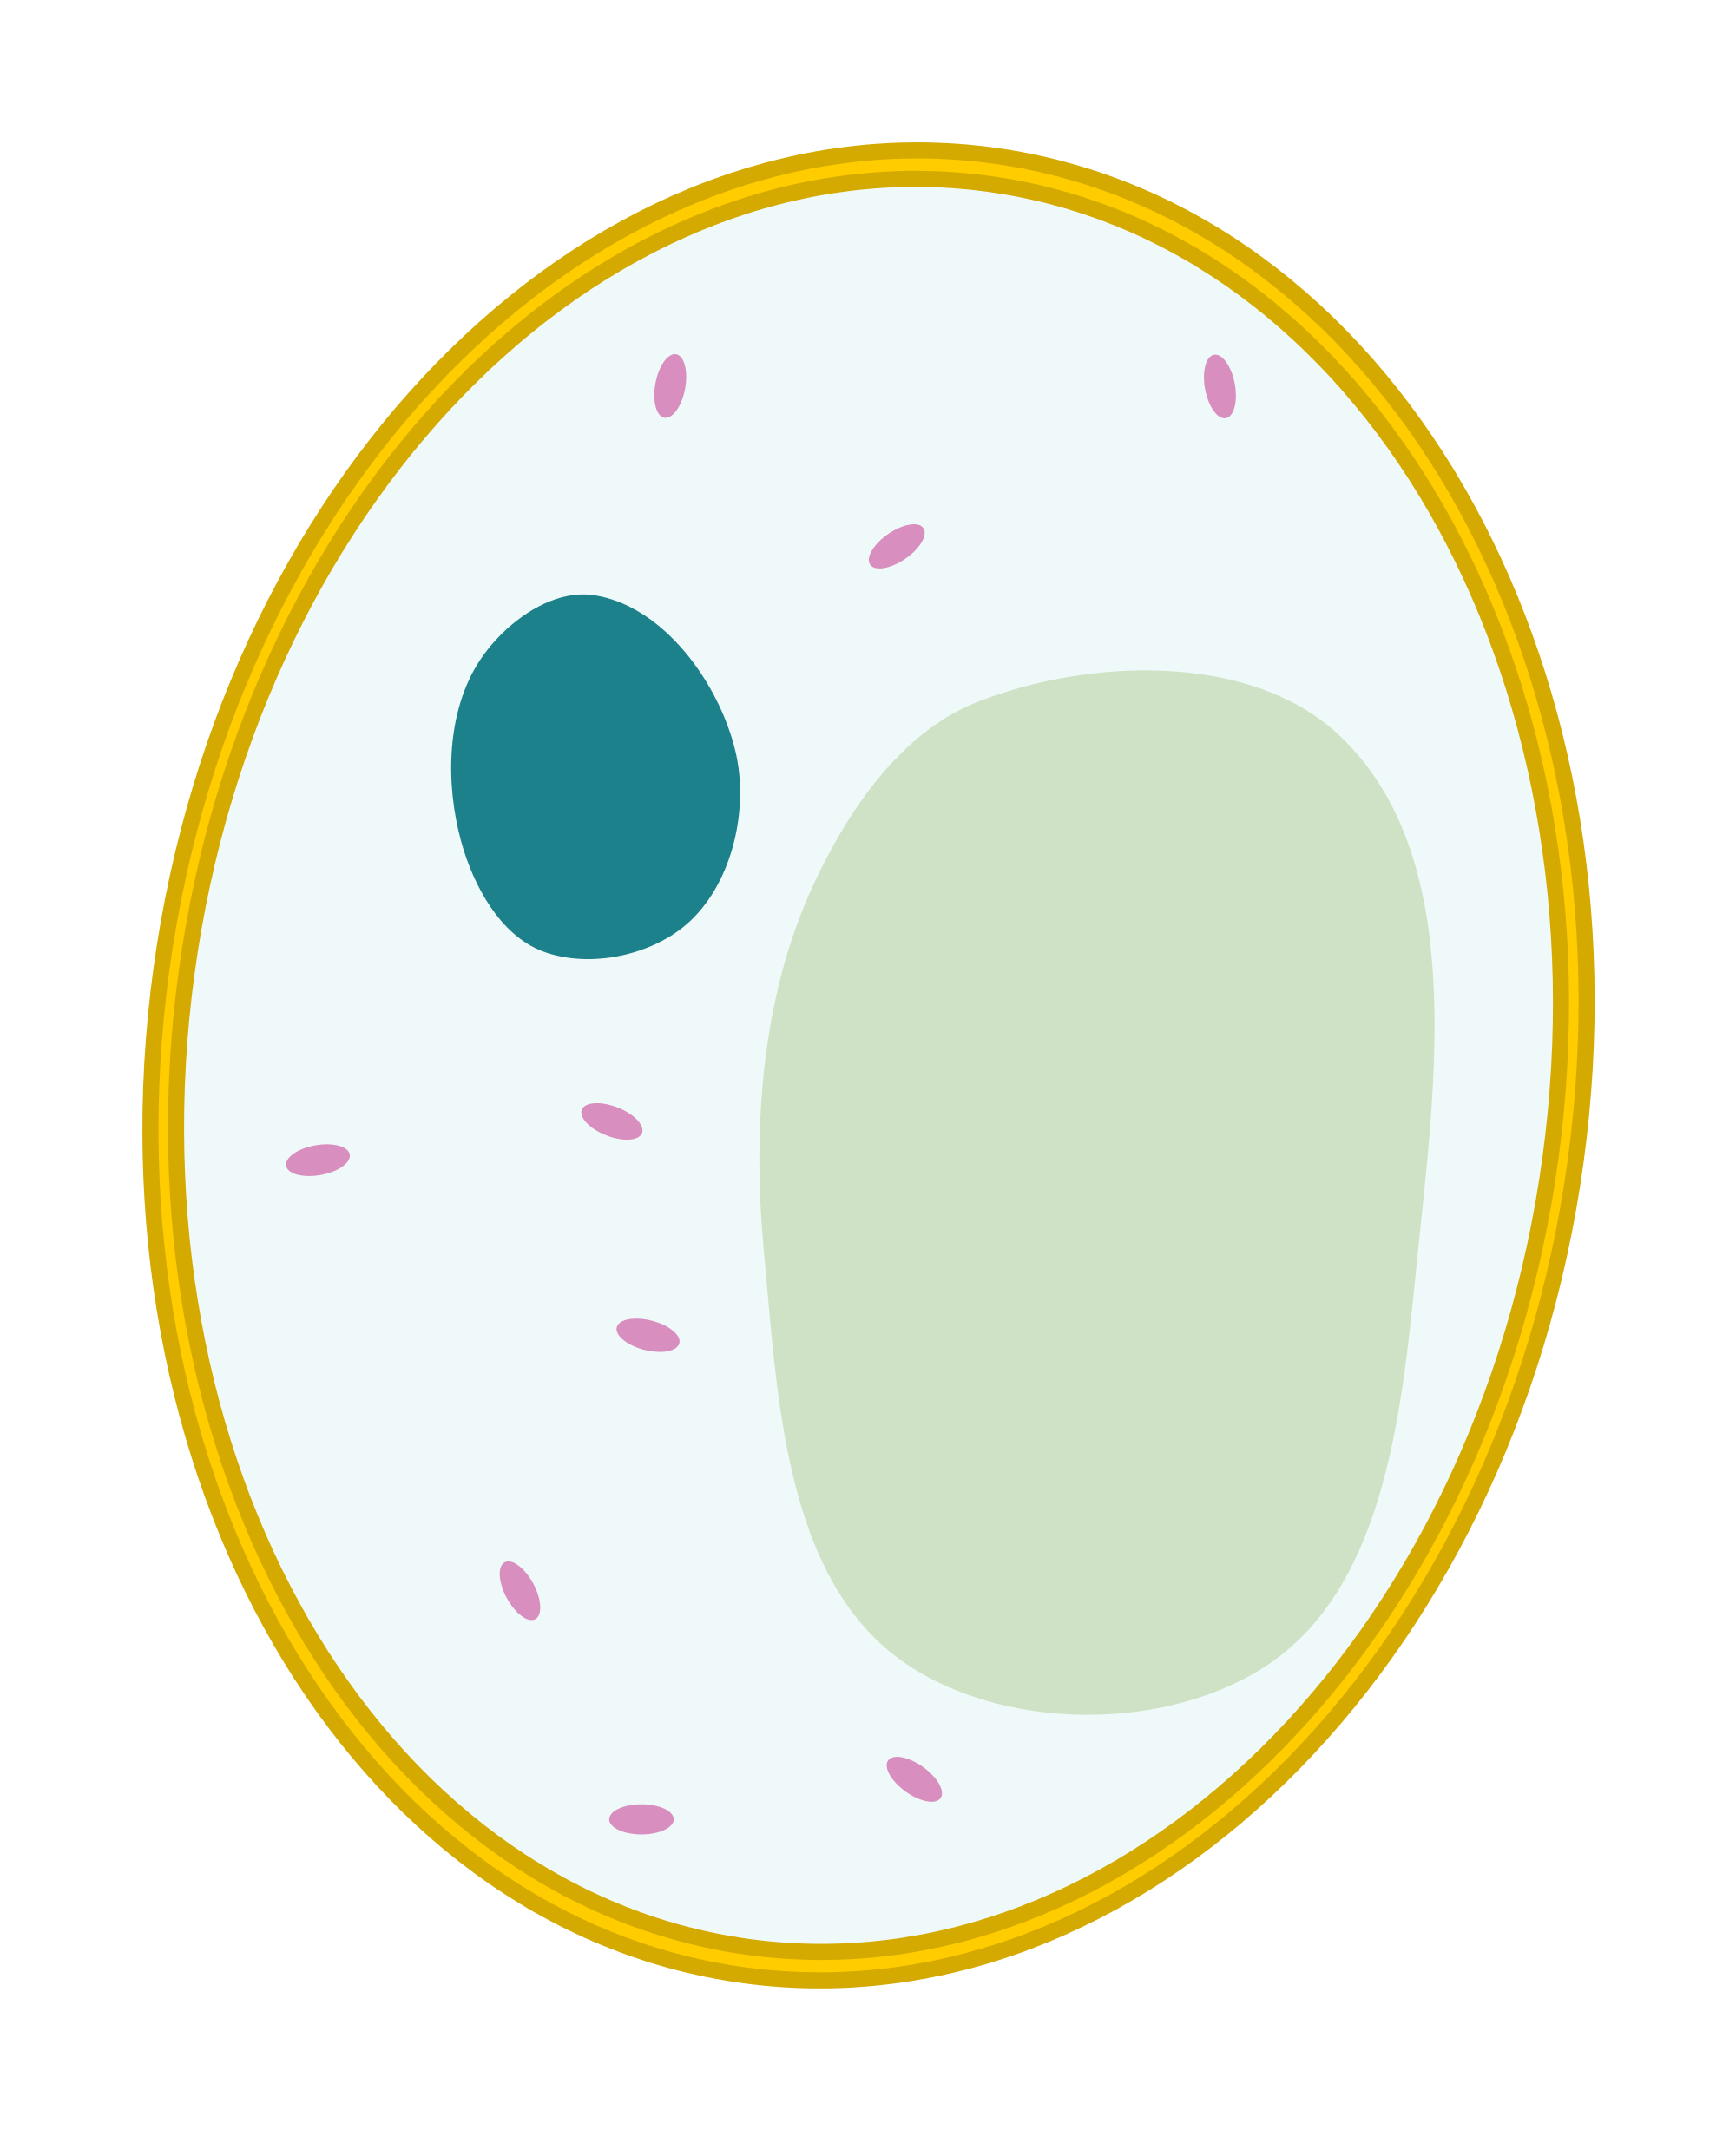 File:Simple diagram of yeast cell (blank).svg - ClipArt ...